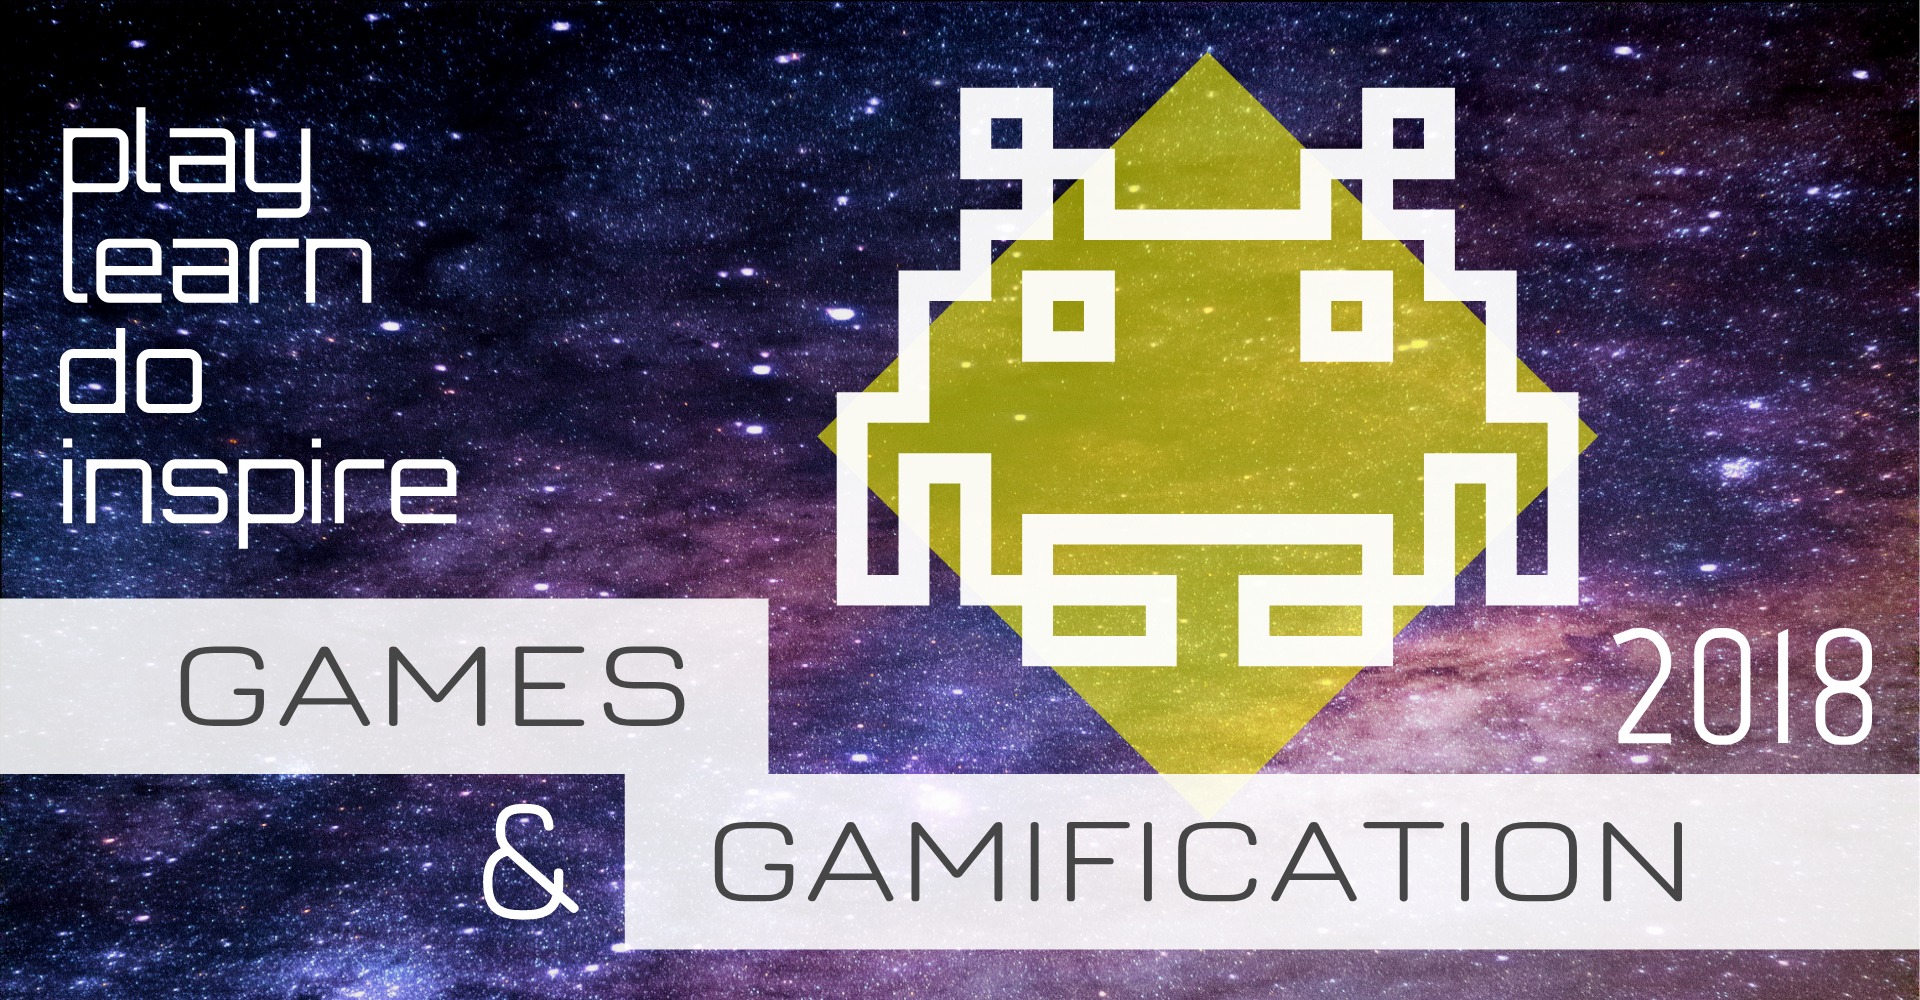 Games and Gamification 2018